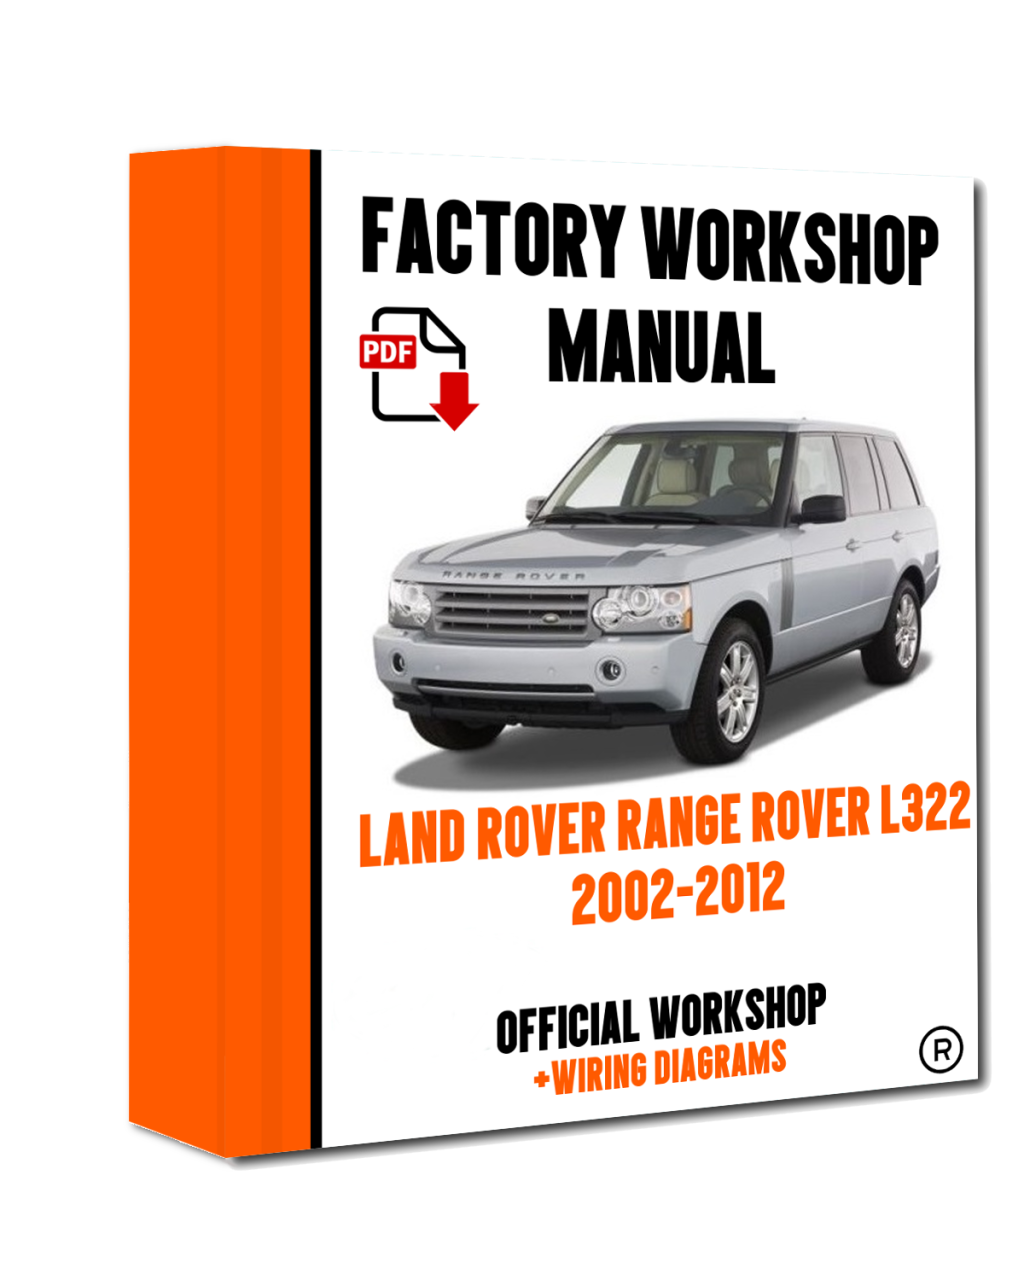 Picture of: OFFICIAL WORKSHOP Manual Service Repair Land Rover Range